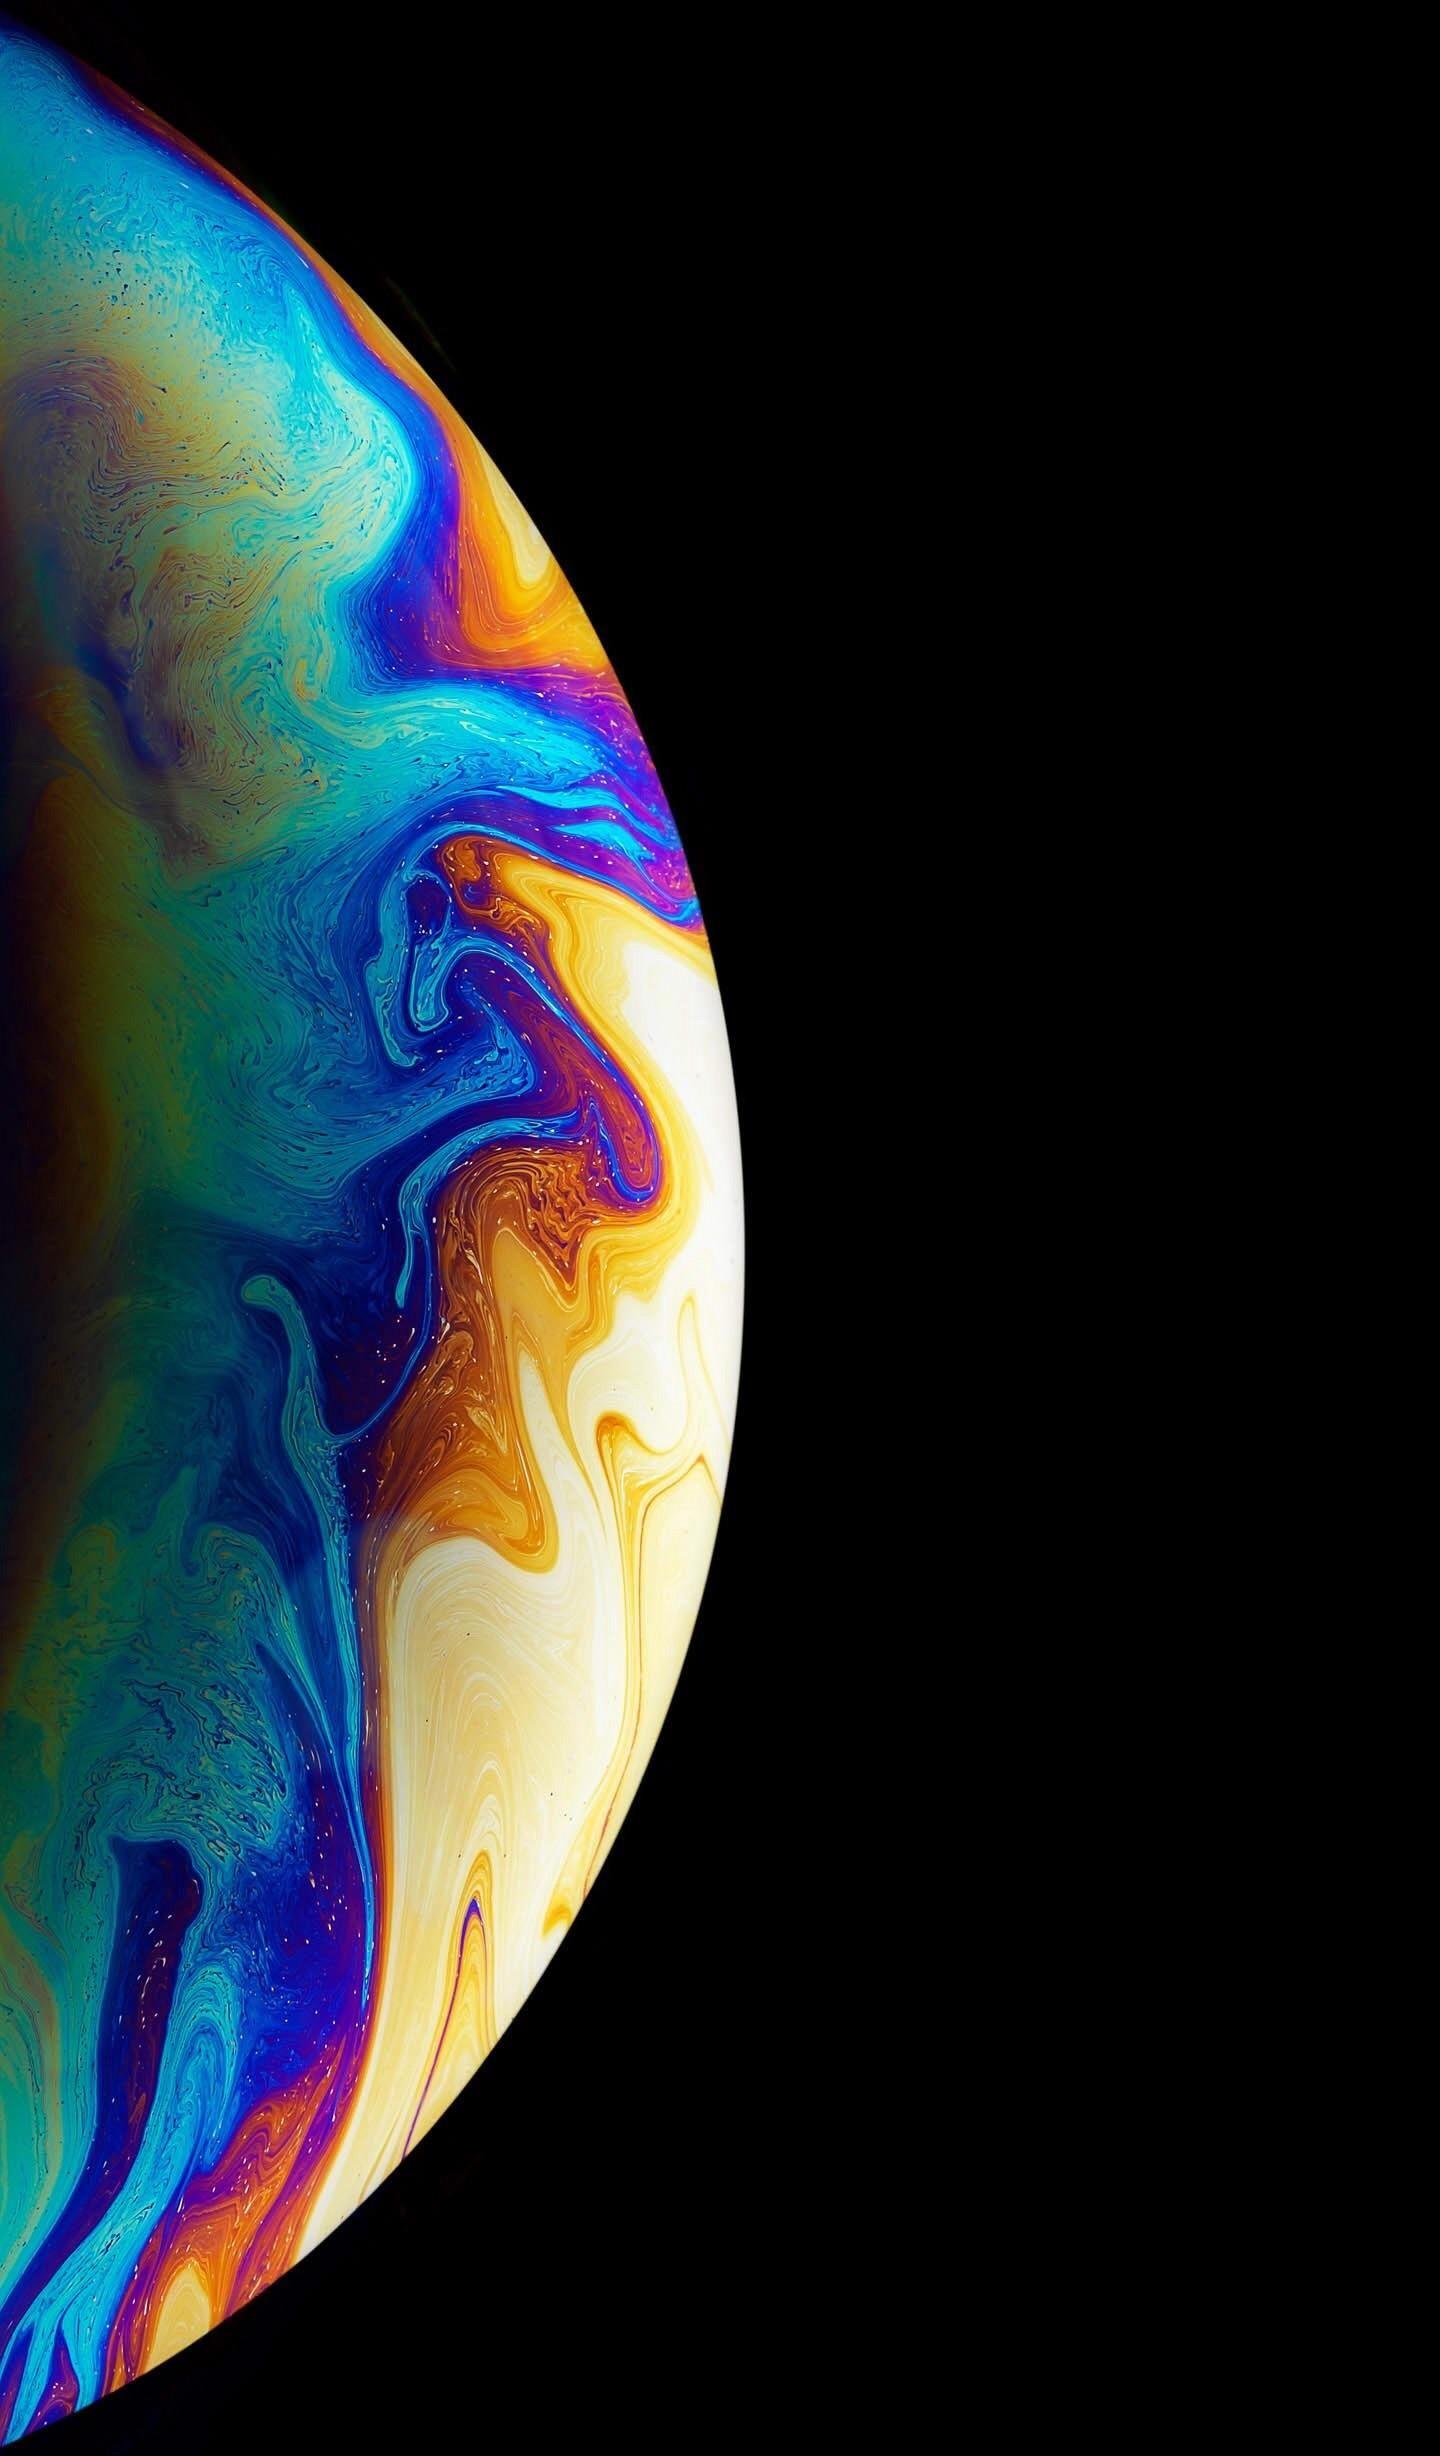 Bubble Planet!. Abstract iphone wallpaper, iPhone wallpaper, Android wallpaper